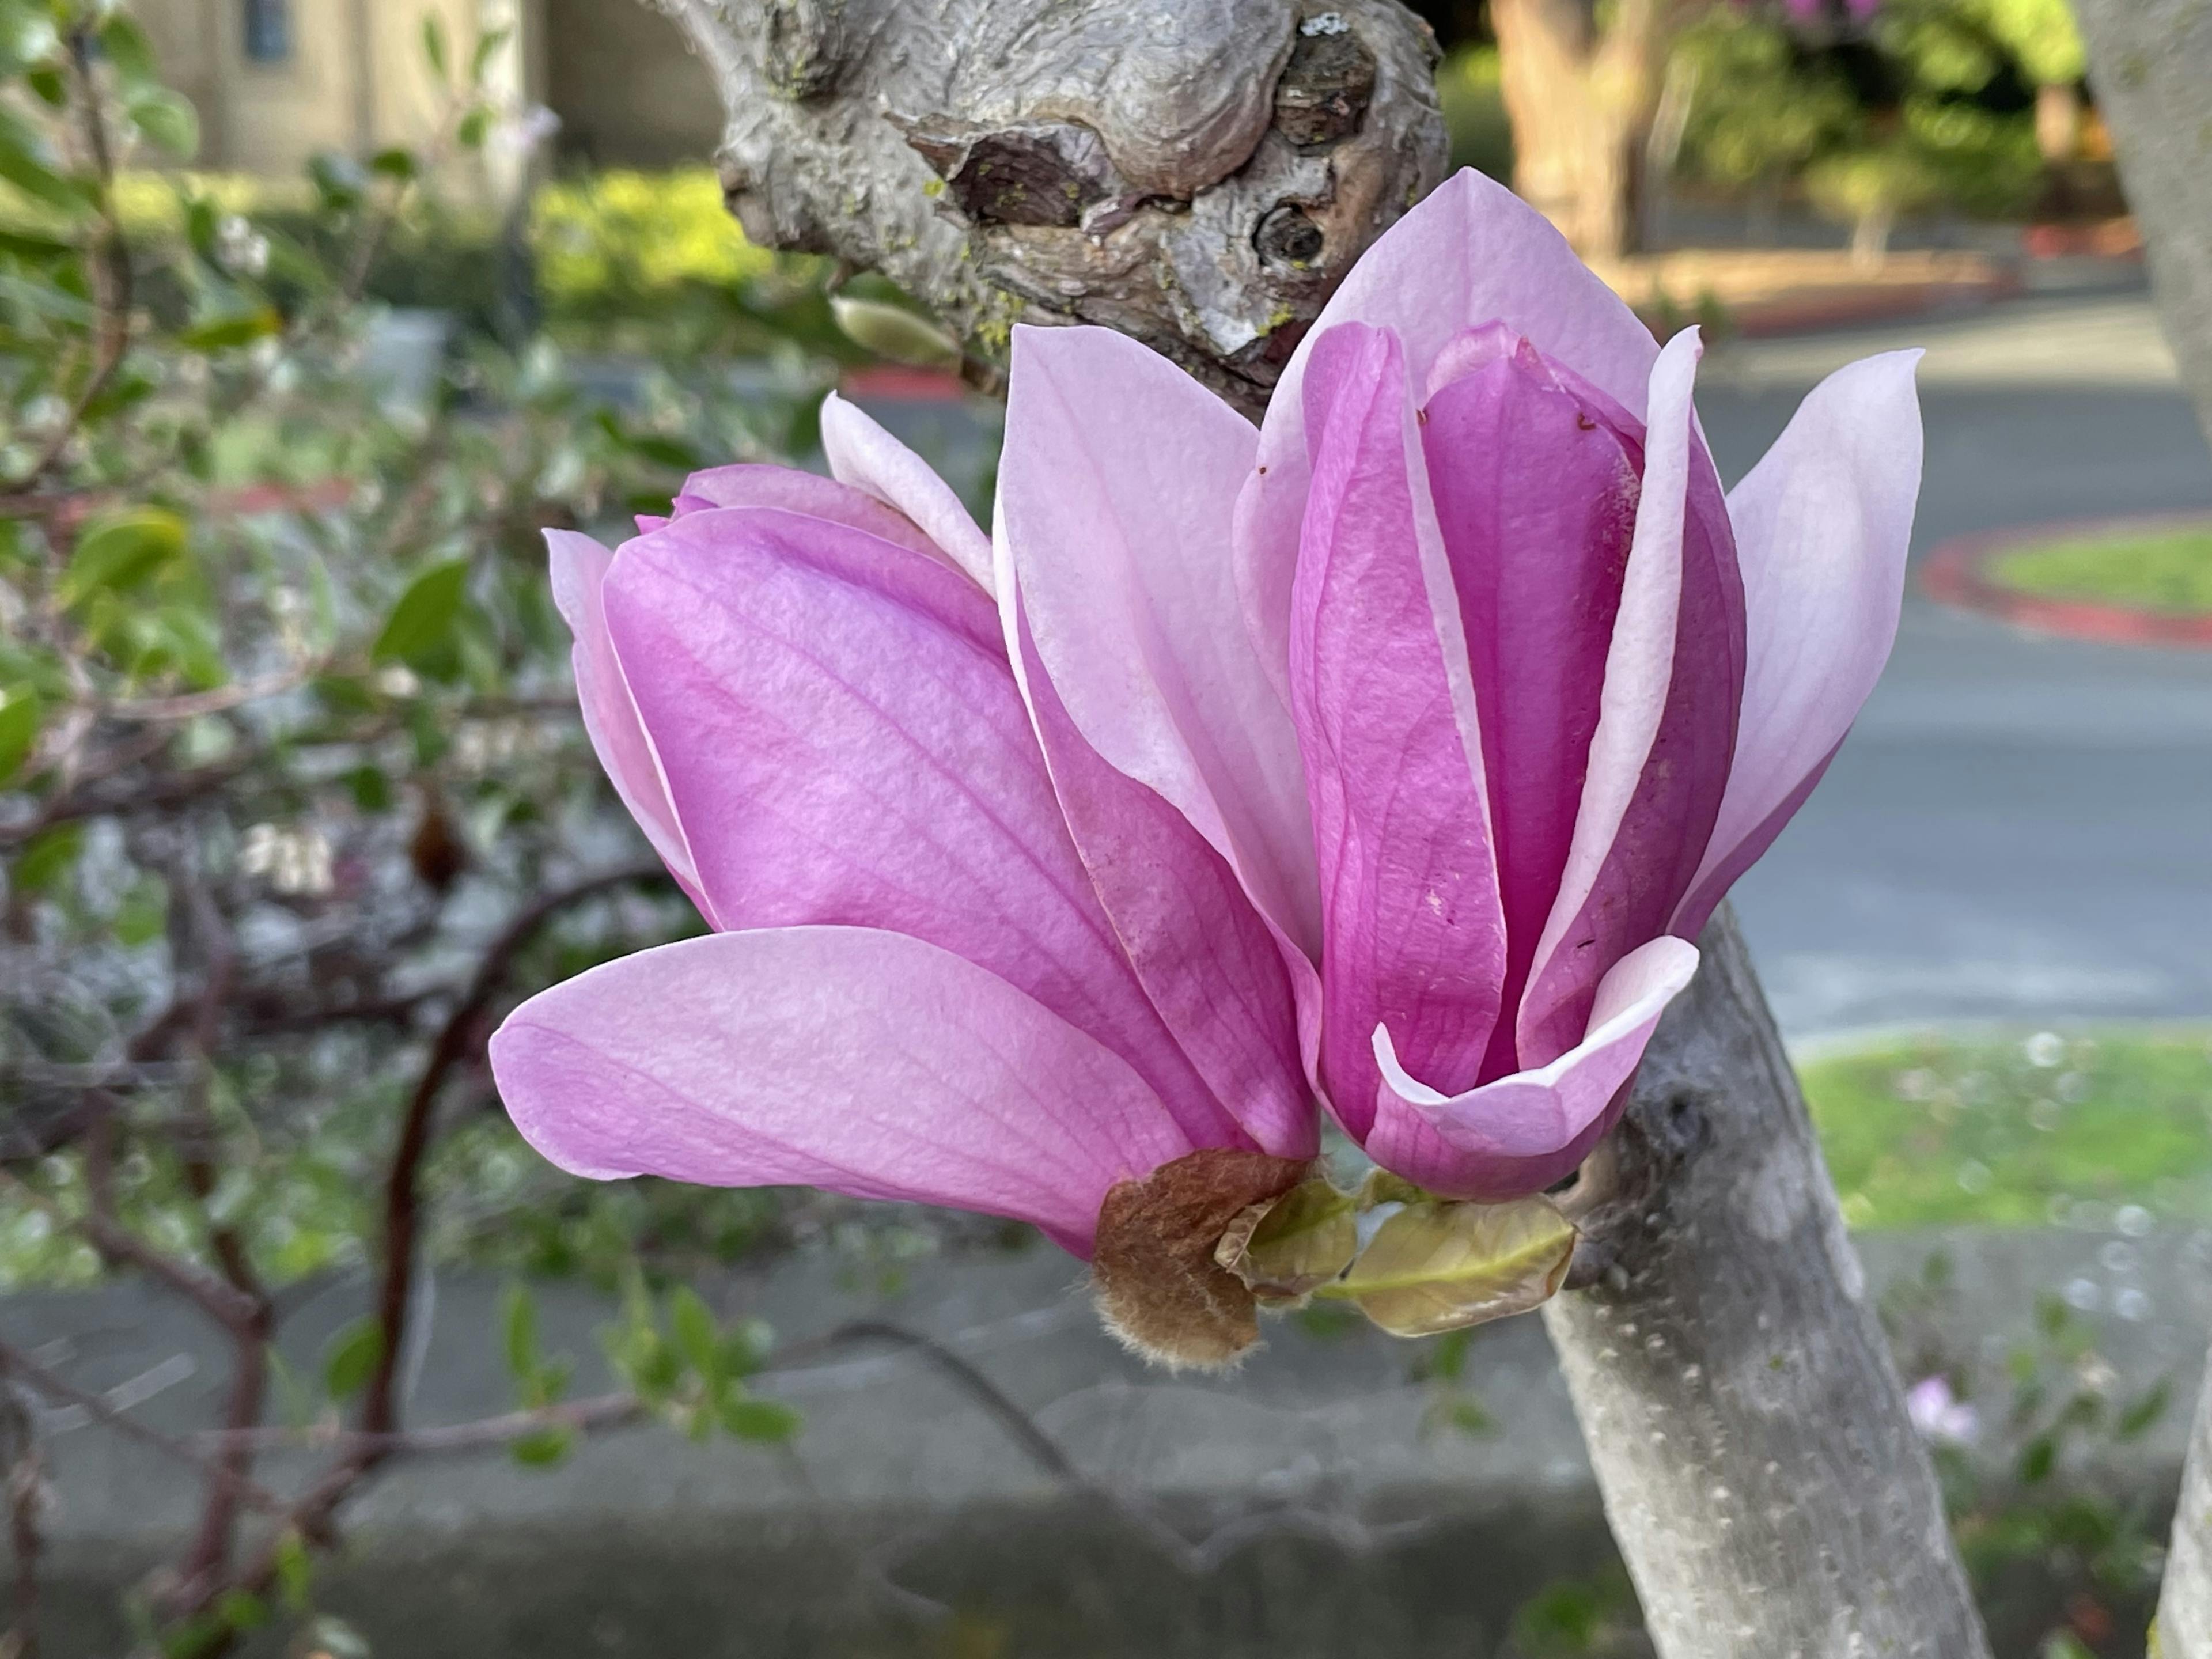 A blossoming Magnolia liliiflora portrudes from a tree branch in the foreground. The background of the image contains various other plants and an asphalt path.